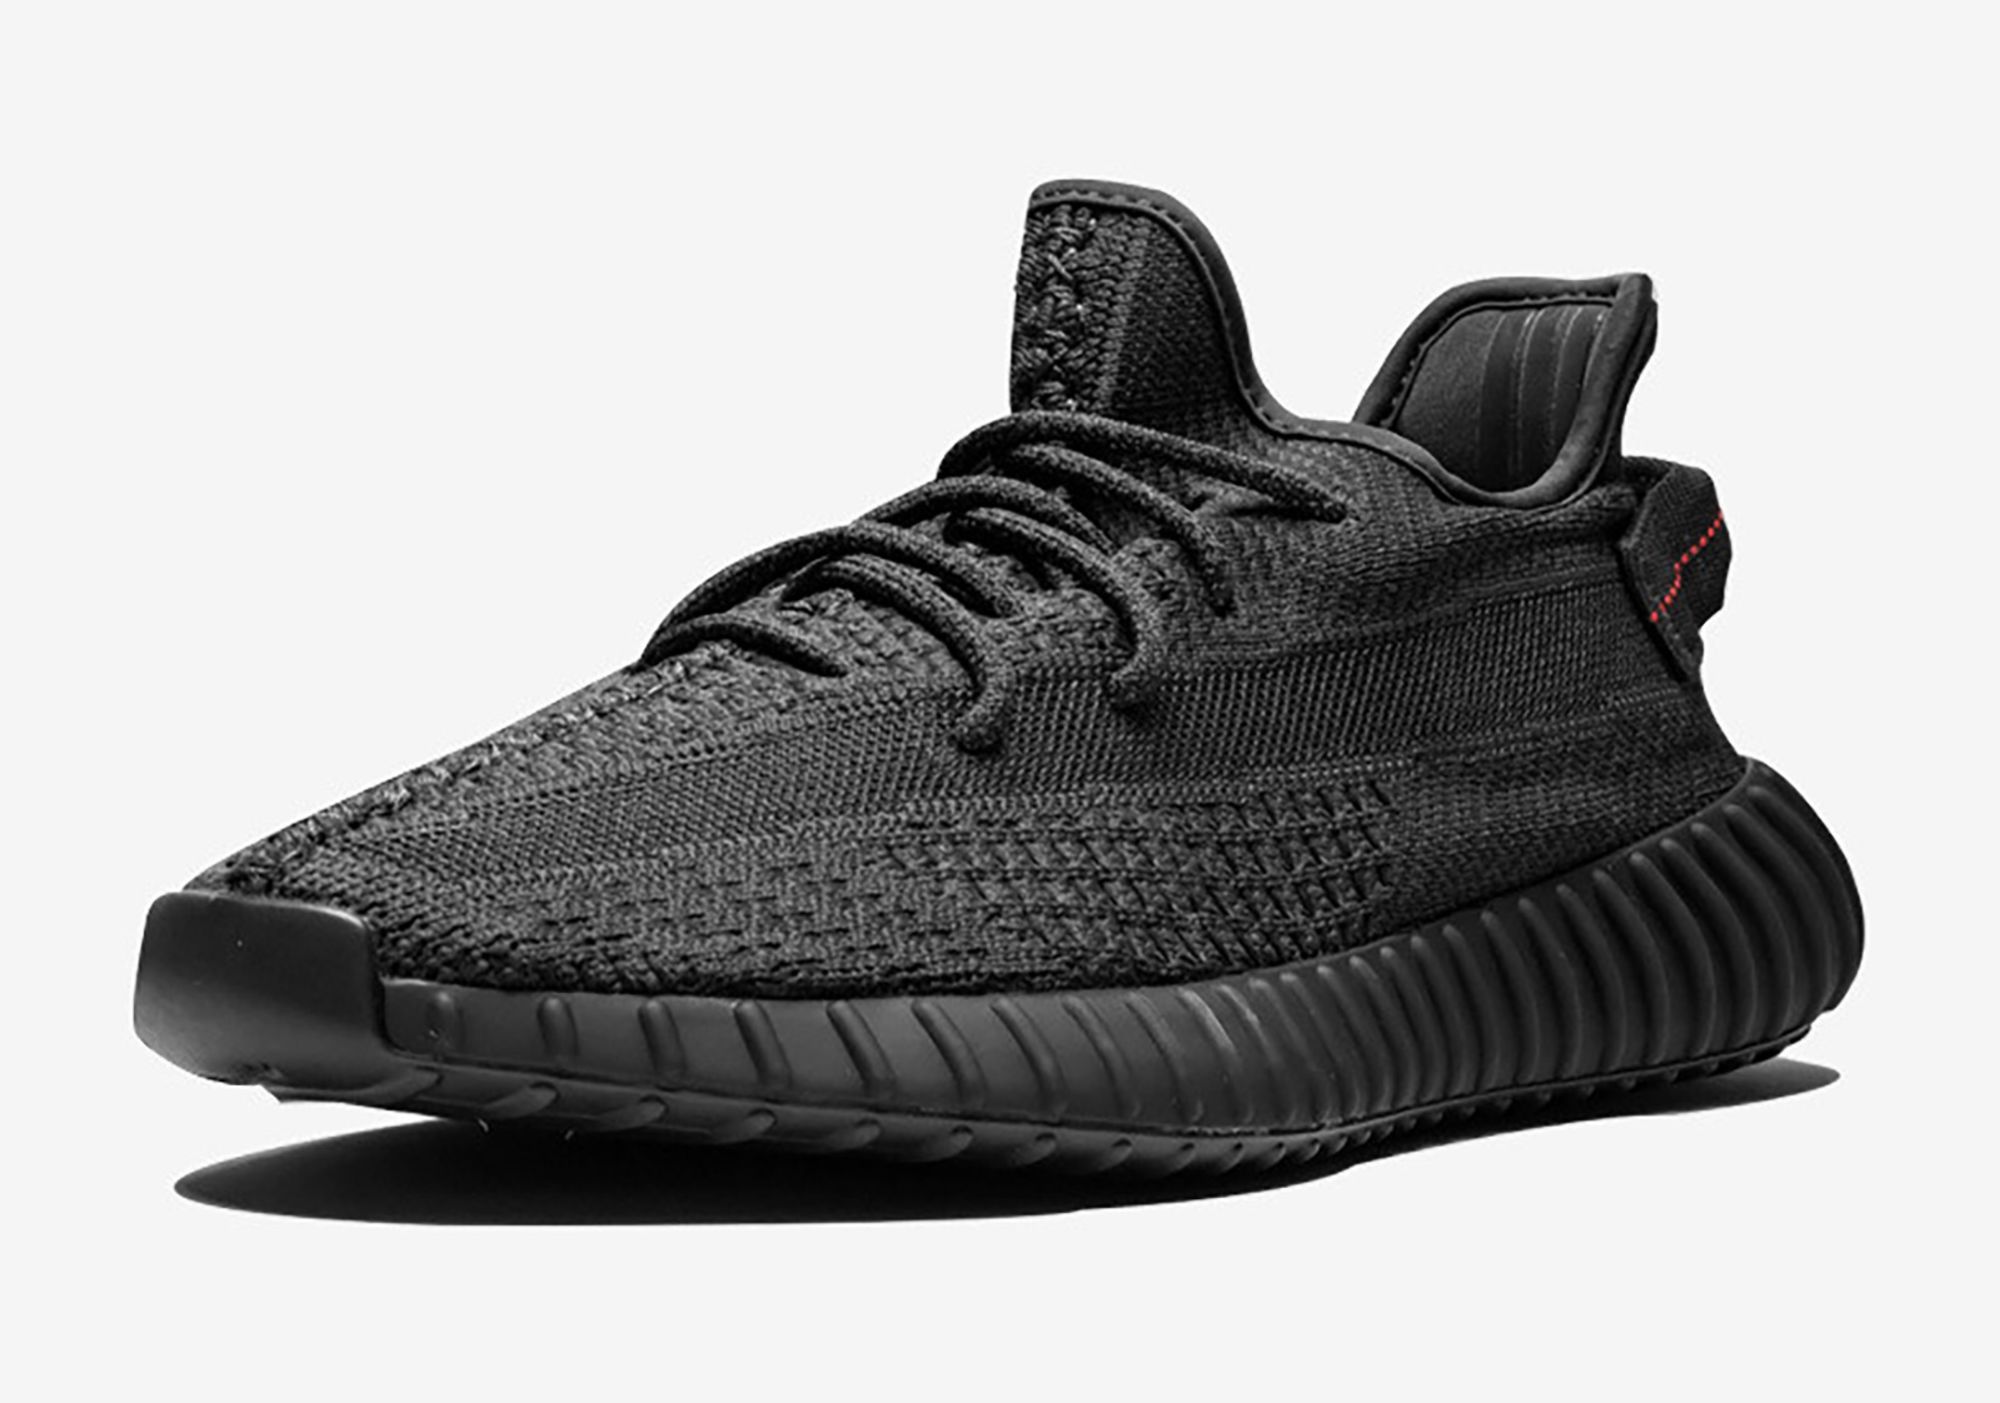 Adidas Yeezy Boost 350 V2: Shoppers line up for new Kanye West sneaker